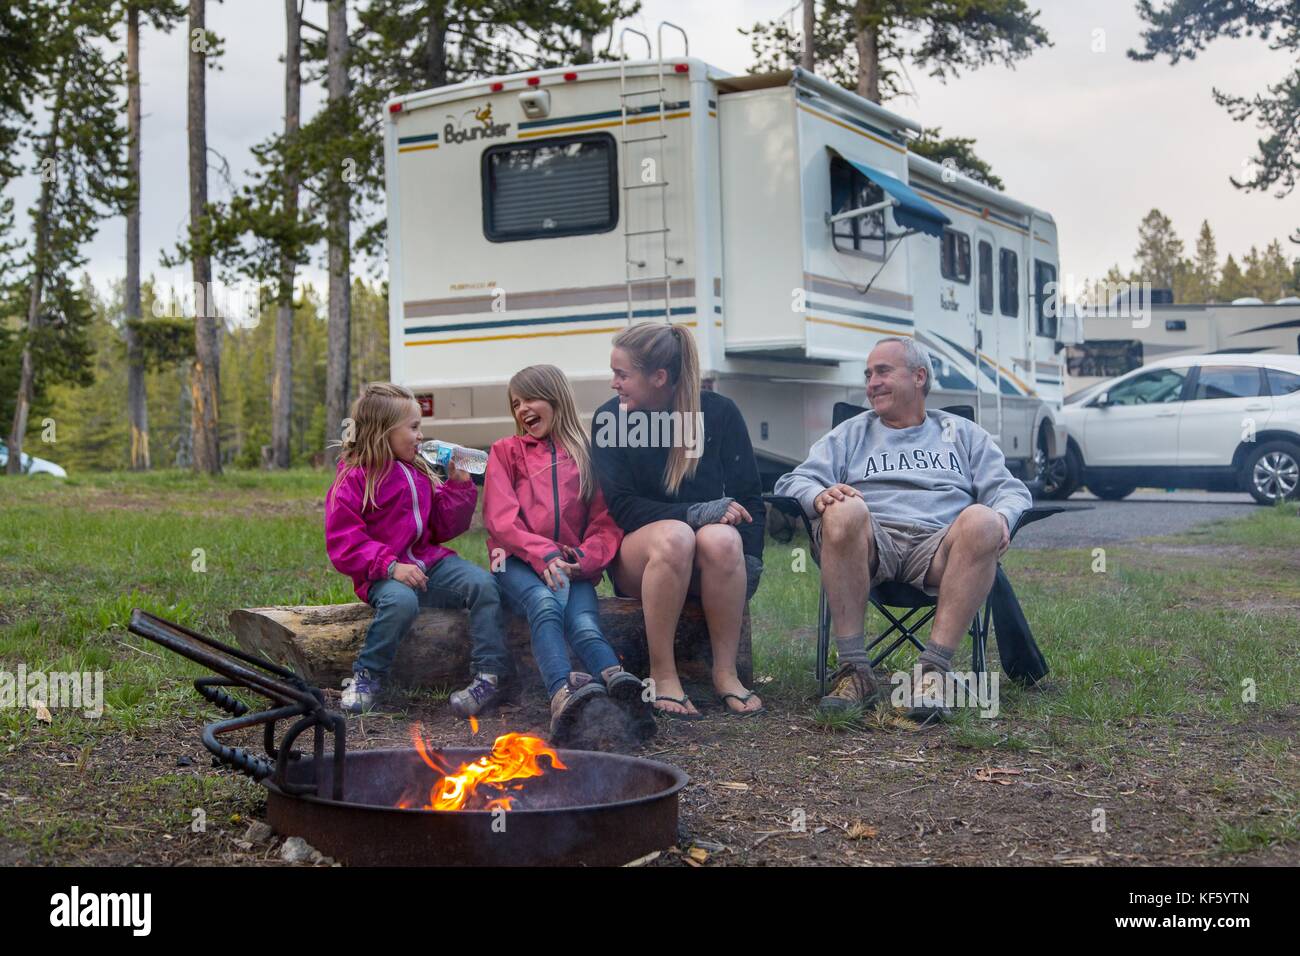 Family in the Norris Camground, with a recreational vehicle, laughing and sitting around a campfire, Yellowstone National Park, Wyoming, June, 2016. Image courtesy Neal Herbert/Yellowstone National Park. Stock Photo